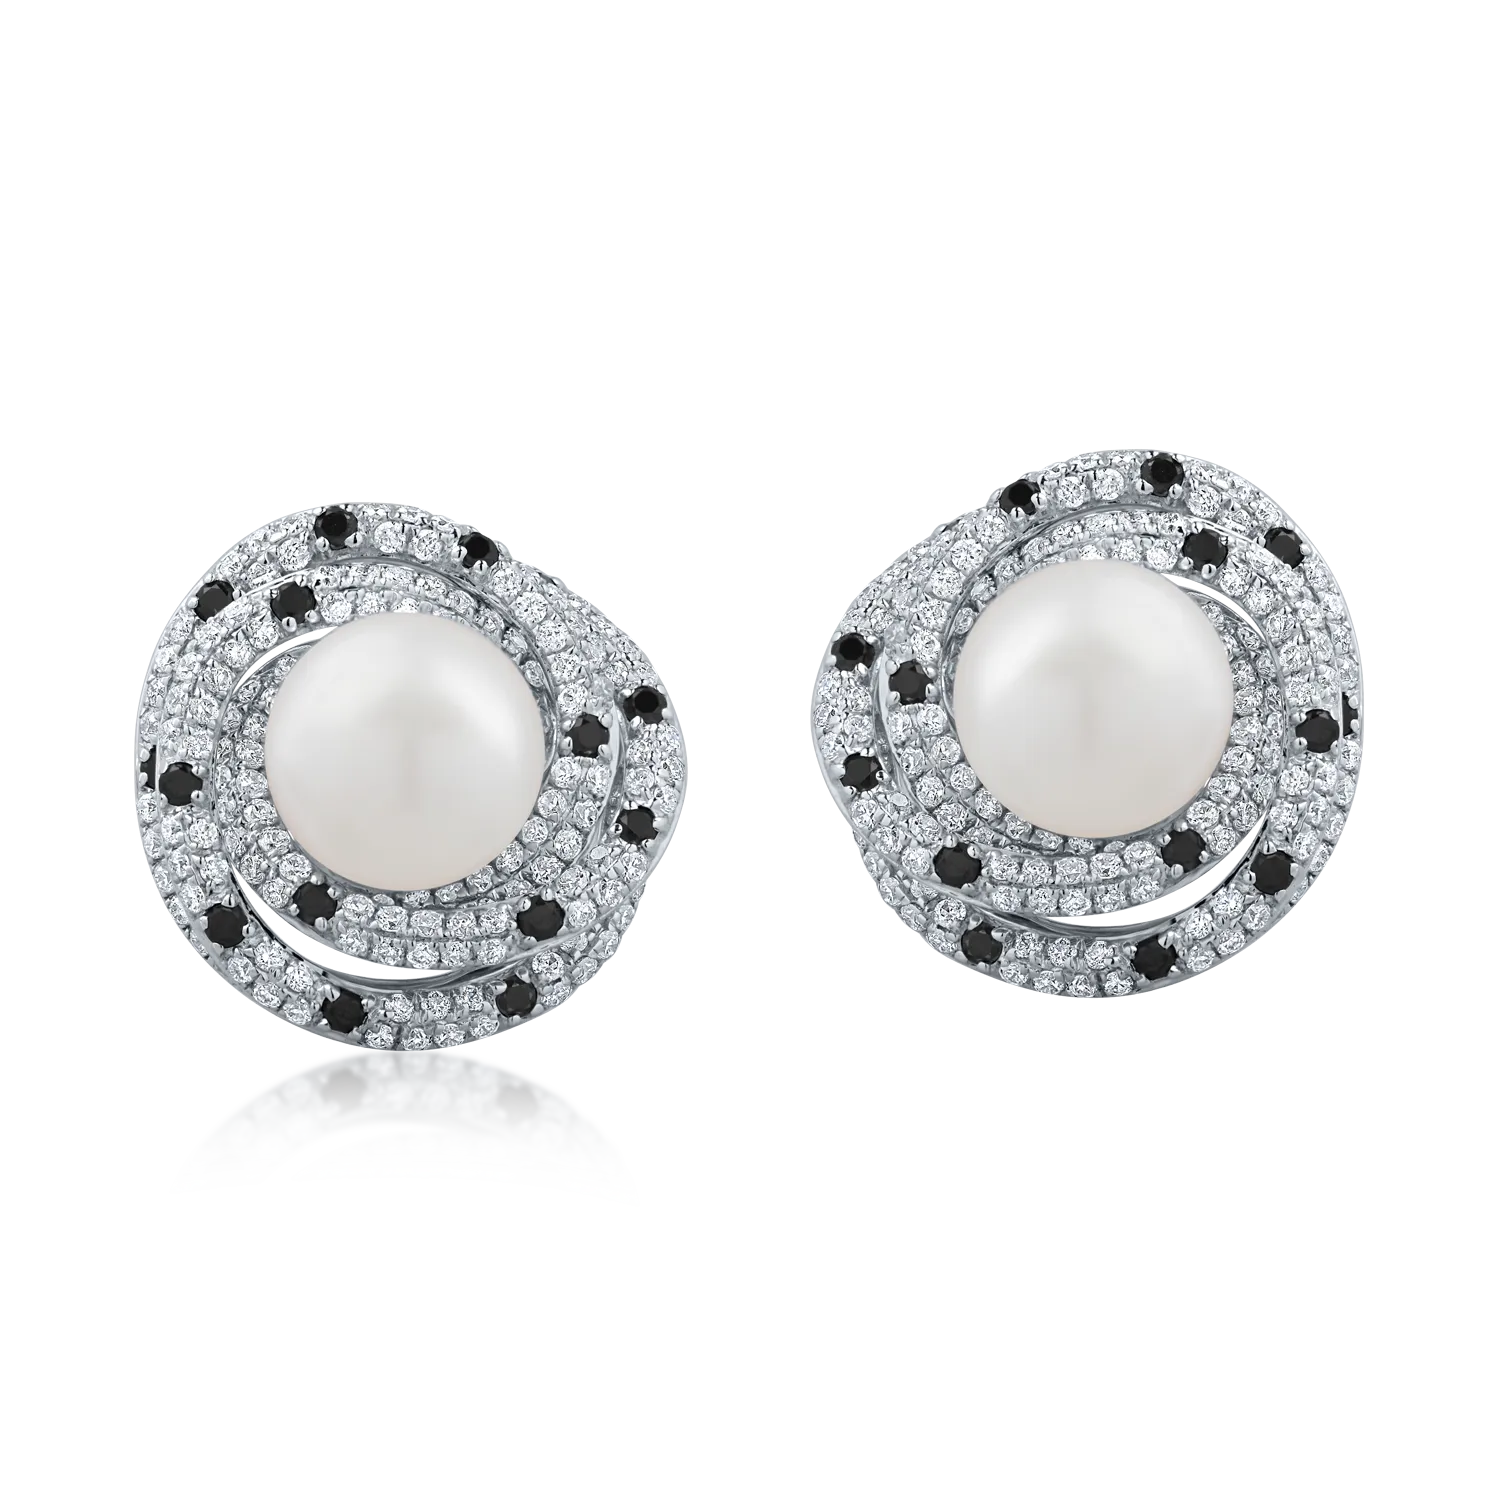 White gold earrings with 6.4ct fresh water pearls and 1.1ct diamonds